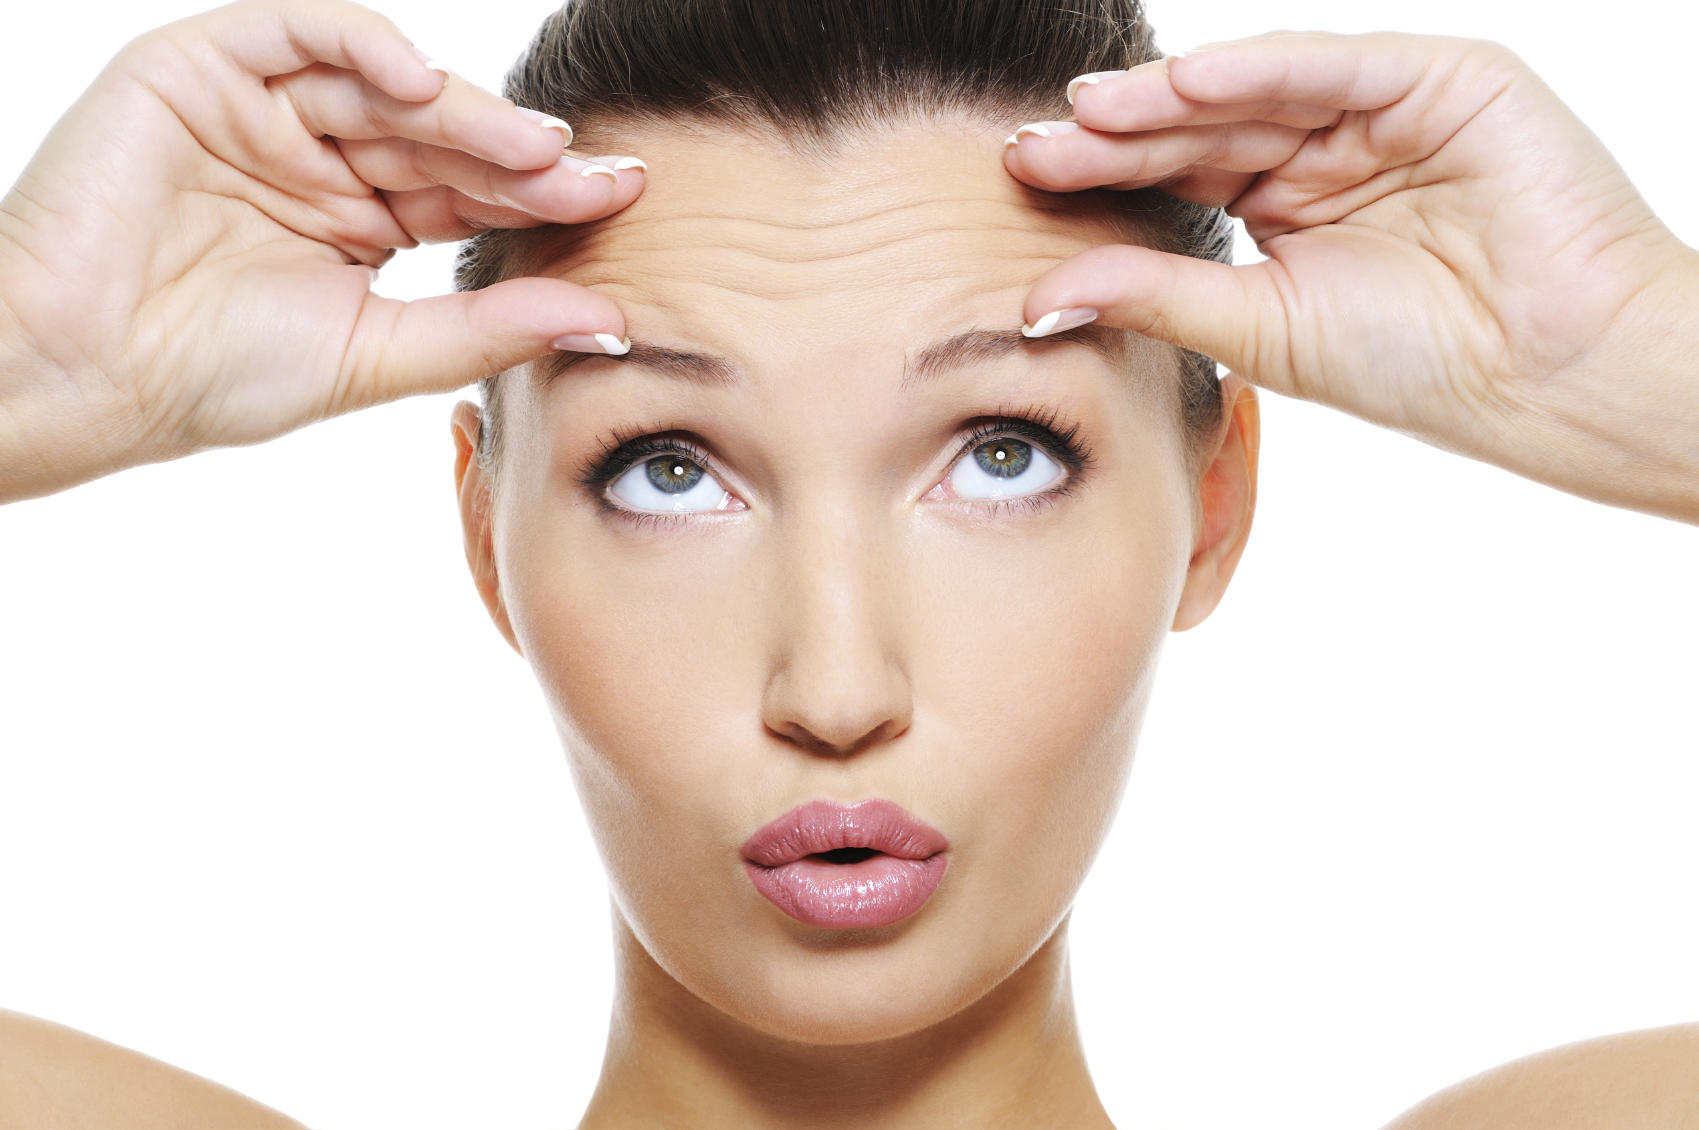 When is the right time to go for anti-aging fillers?